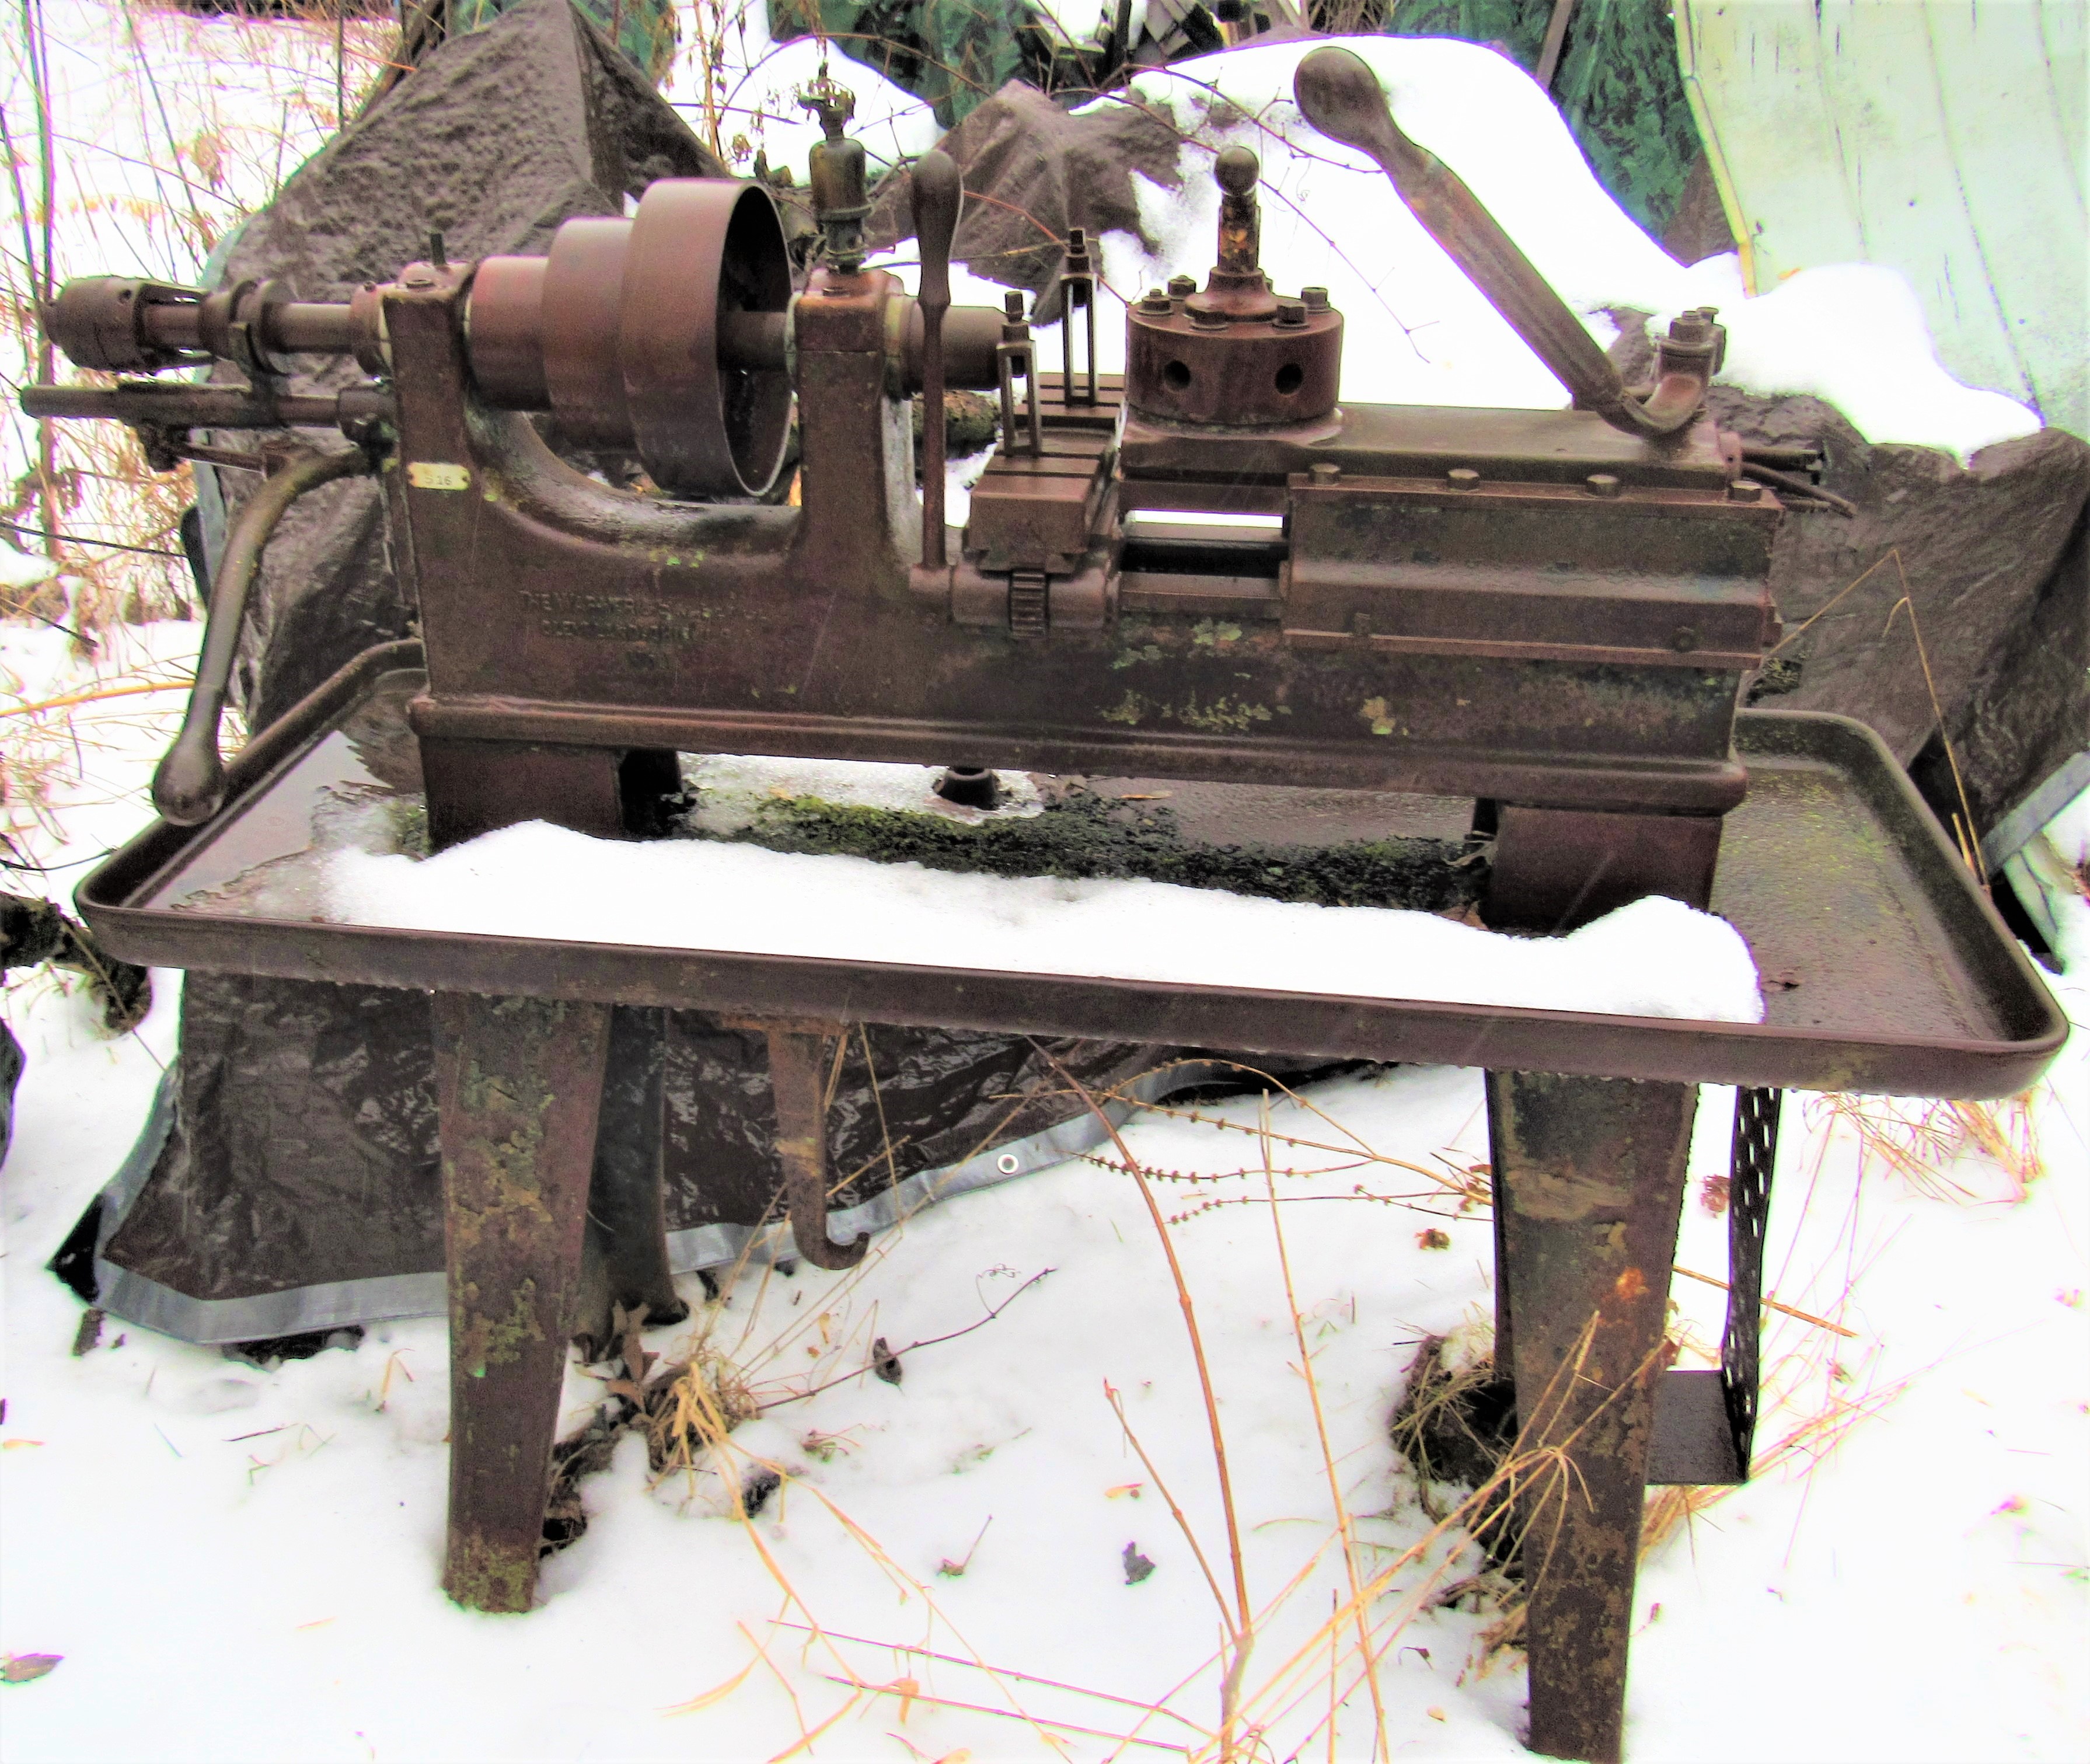 http://antiquemachinery.com/images-2020/IMG_0729-Antique-Old-Vintage-Machines-I-Bought-are-home-safe--Warner-and-Swasey-Turret-Lathe-side-main-view.jpg